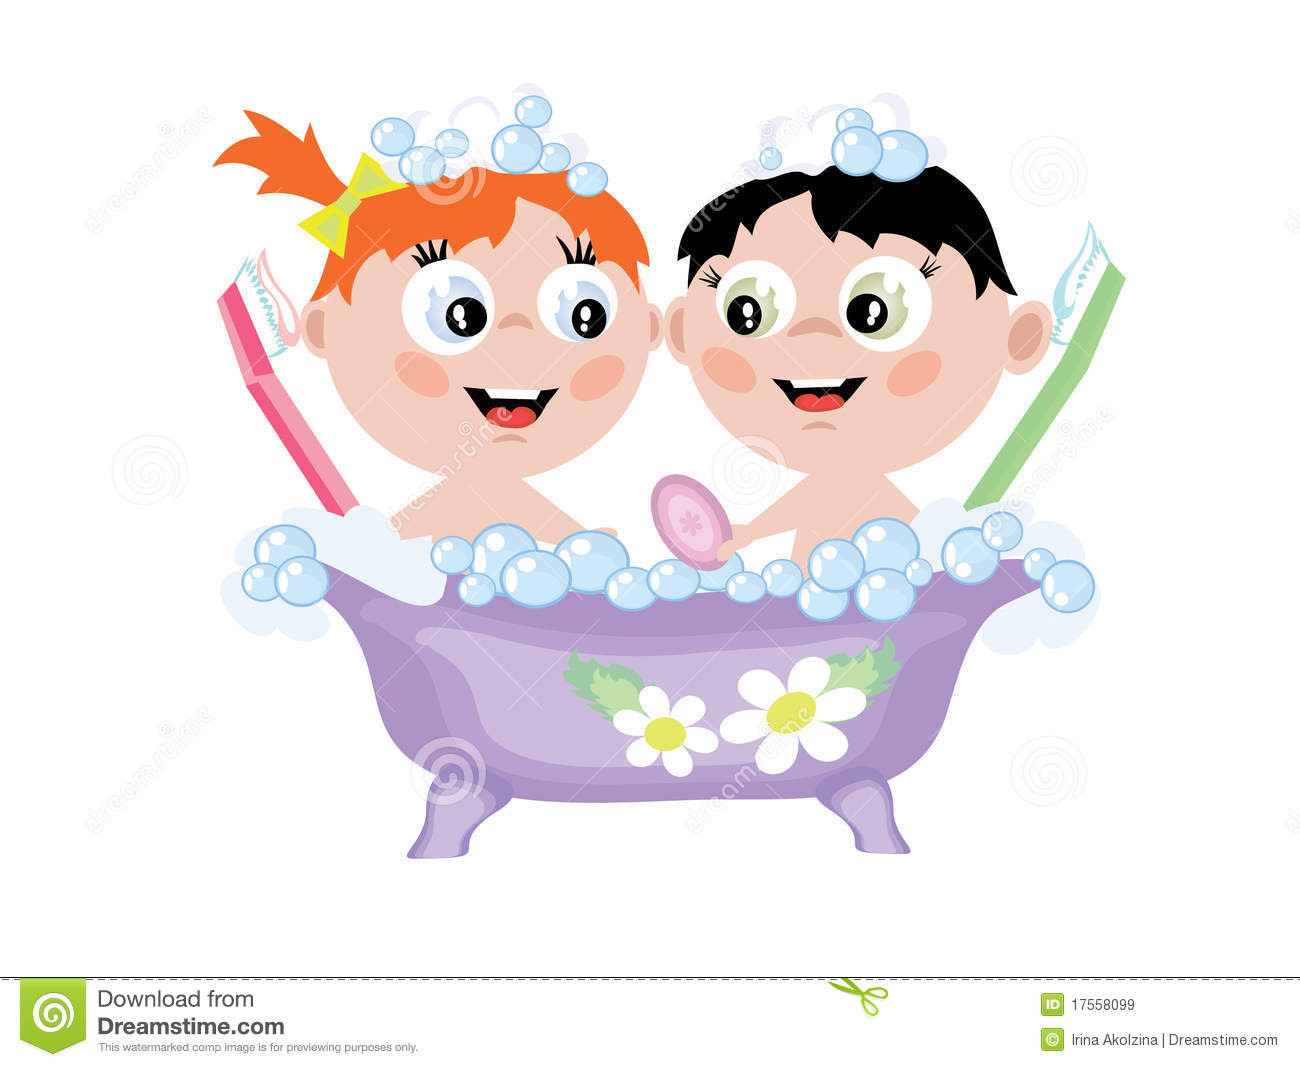 Bathroom Clipart For Kids
 Children In The Bath Royalty Free Stock Image